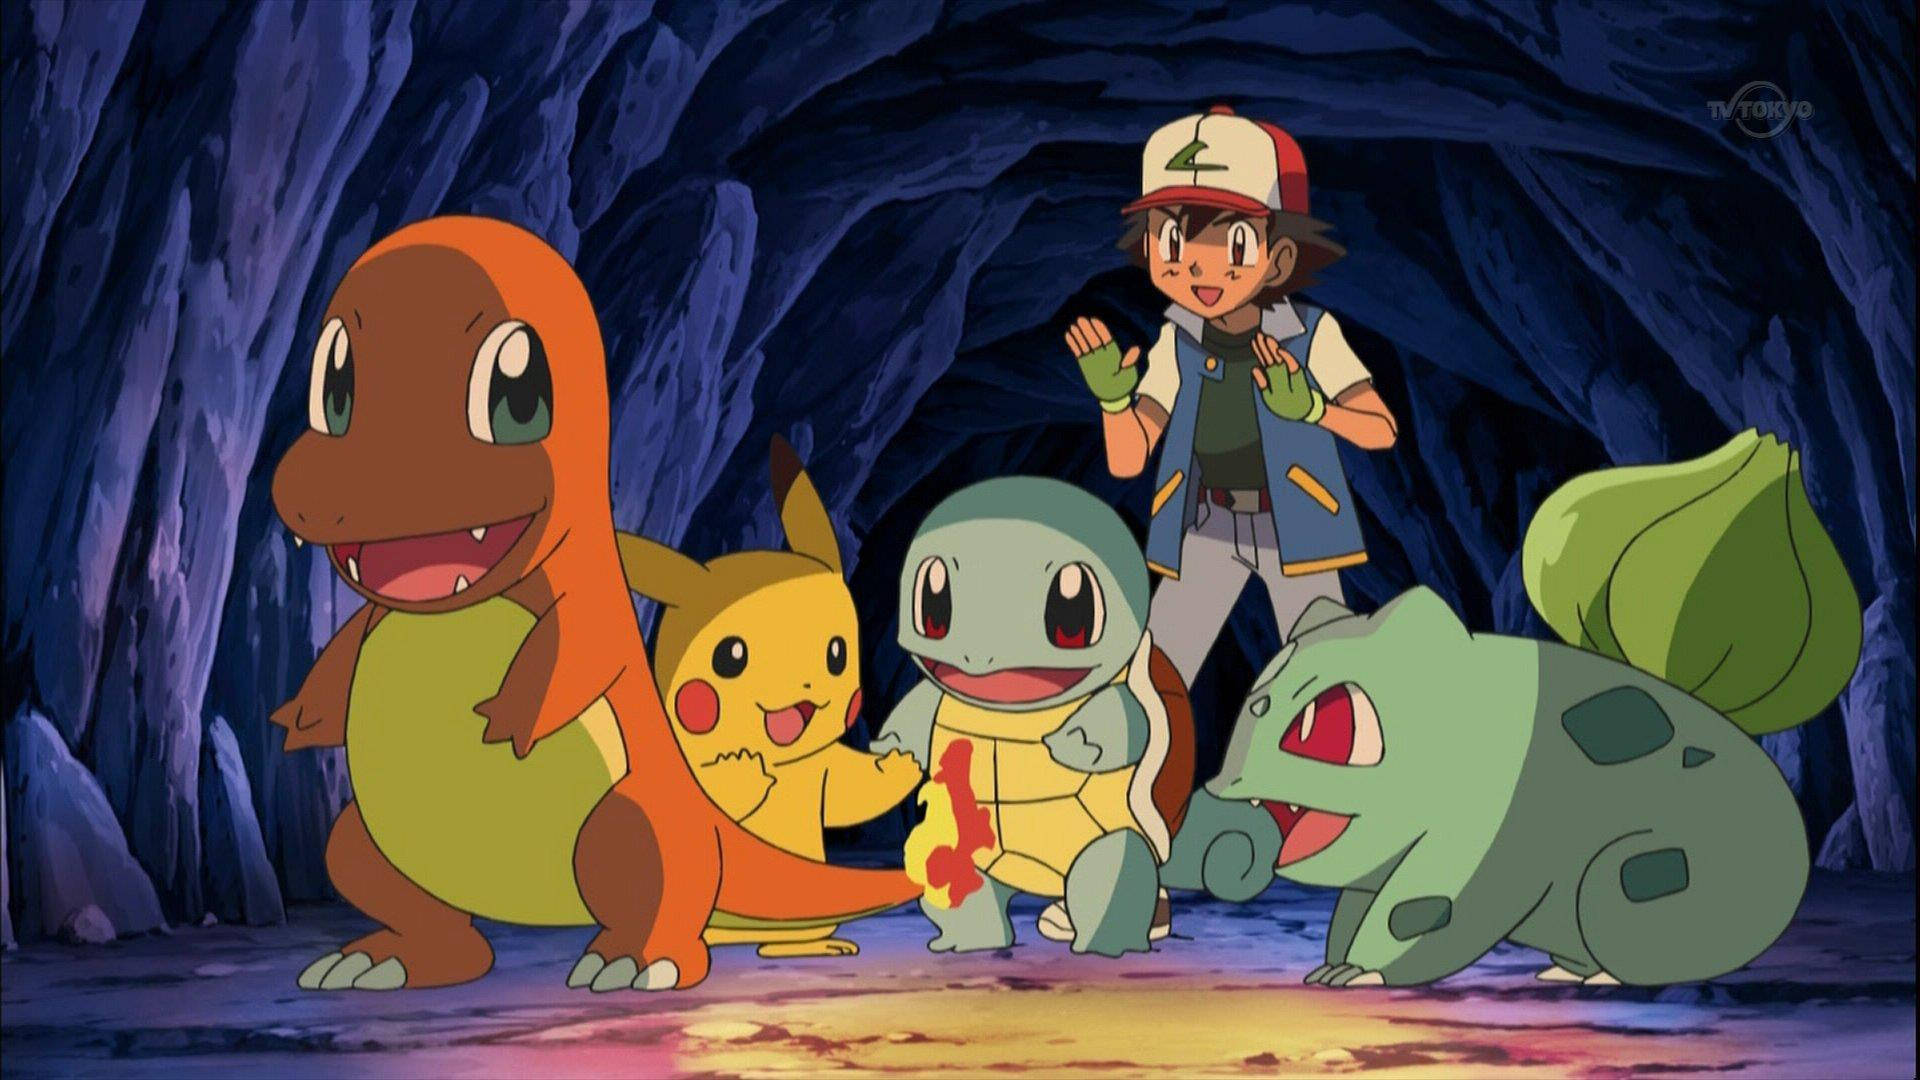 Bulbasaur In A Cave Background